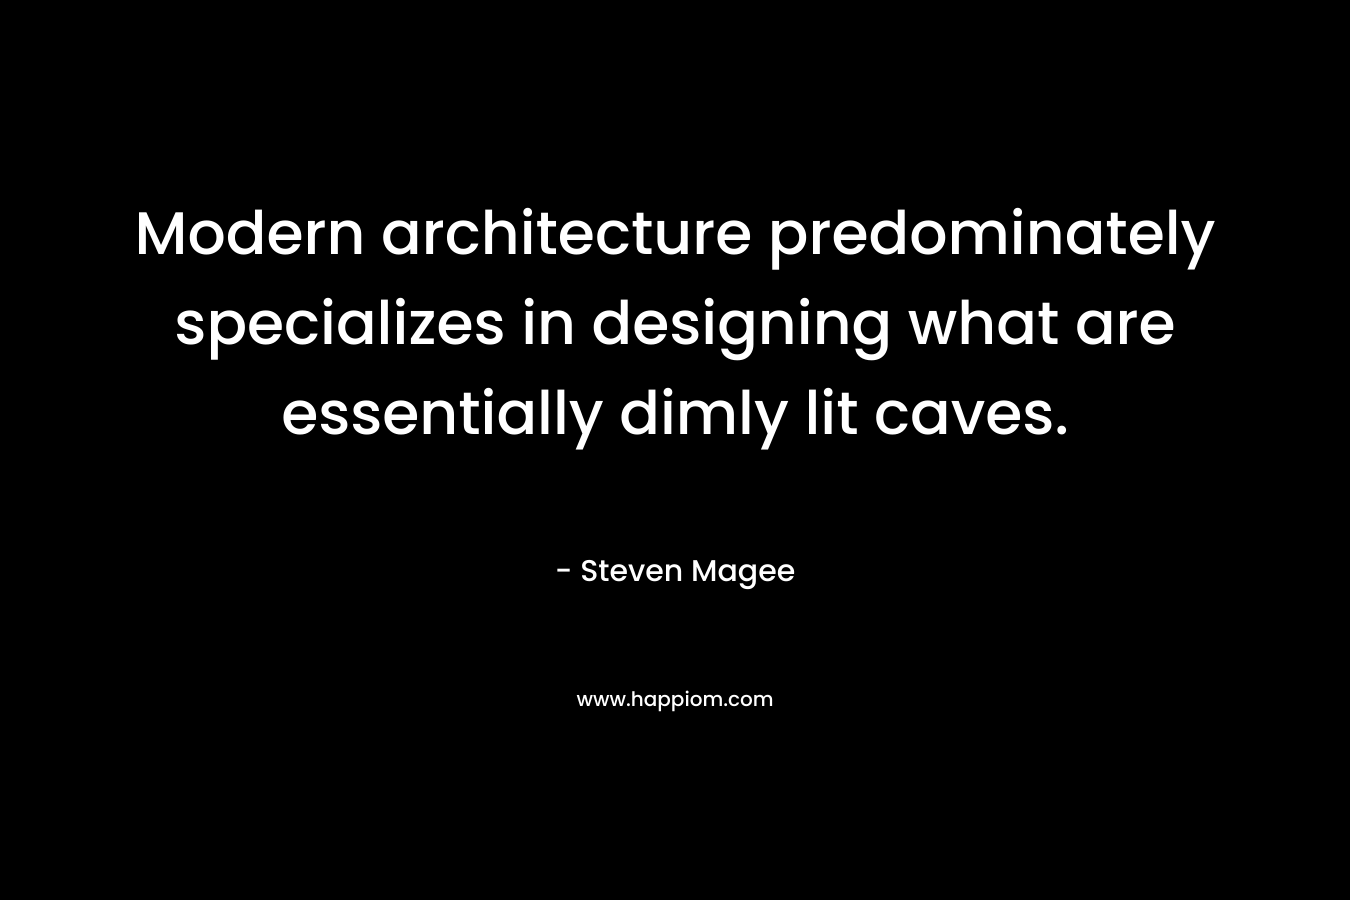 Modern architecture predominately specializes in designing what are essentially dimly lit caves. – Steven Magee